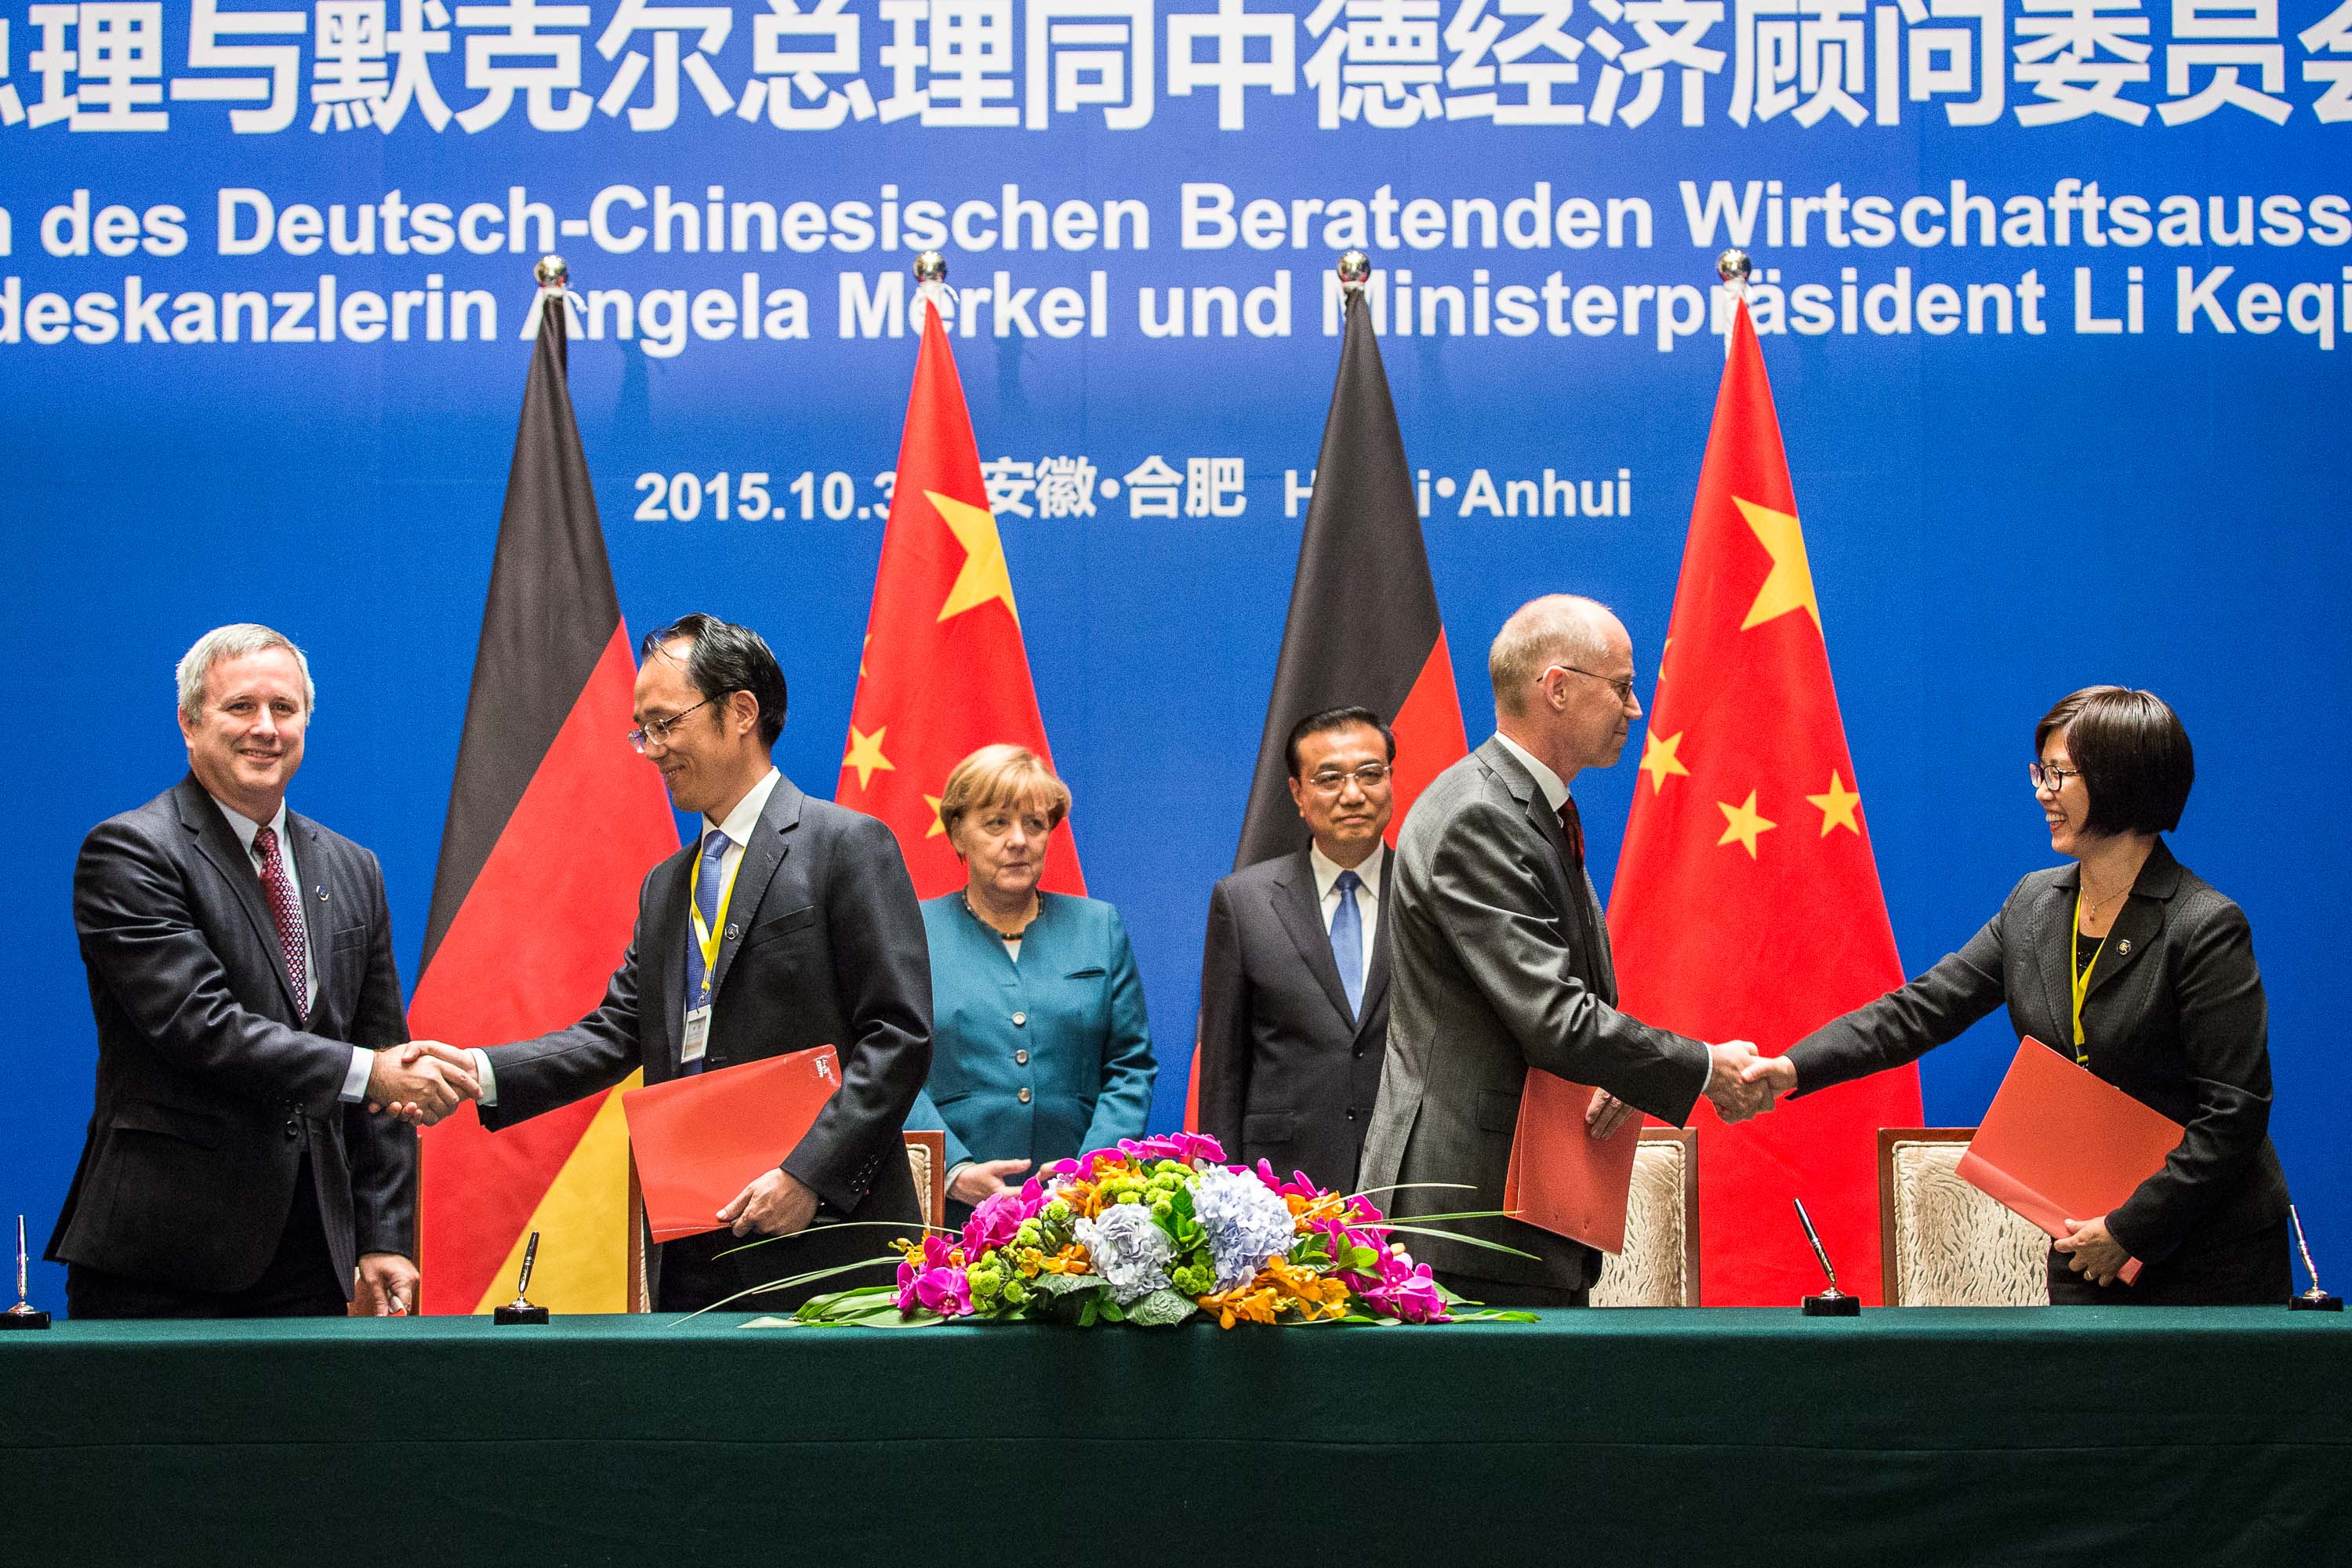 The signing ceremony of the cooperation agreement between UFZ and CLMA took place during the visit of the German Chancellor Angela Merkel in China. This is an important milestone for the Sino-German cooperation within the Major-Water Program (30 October, 2015)